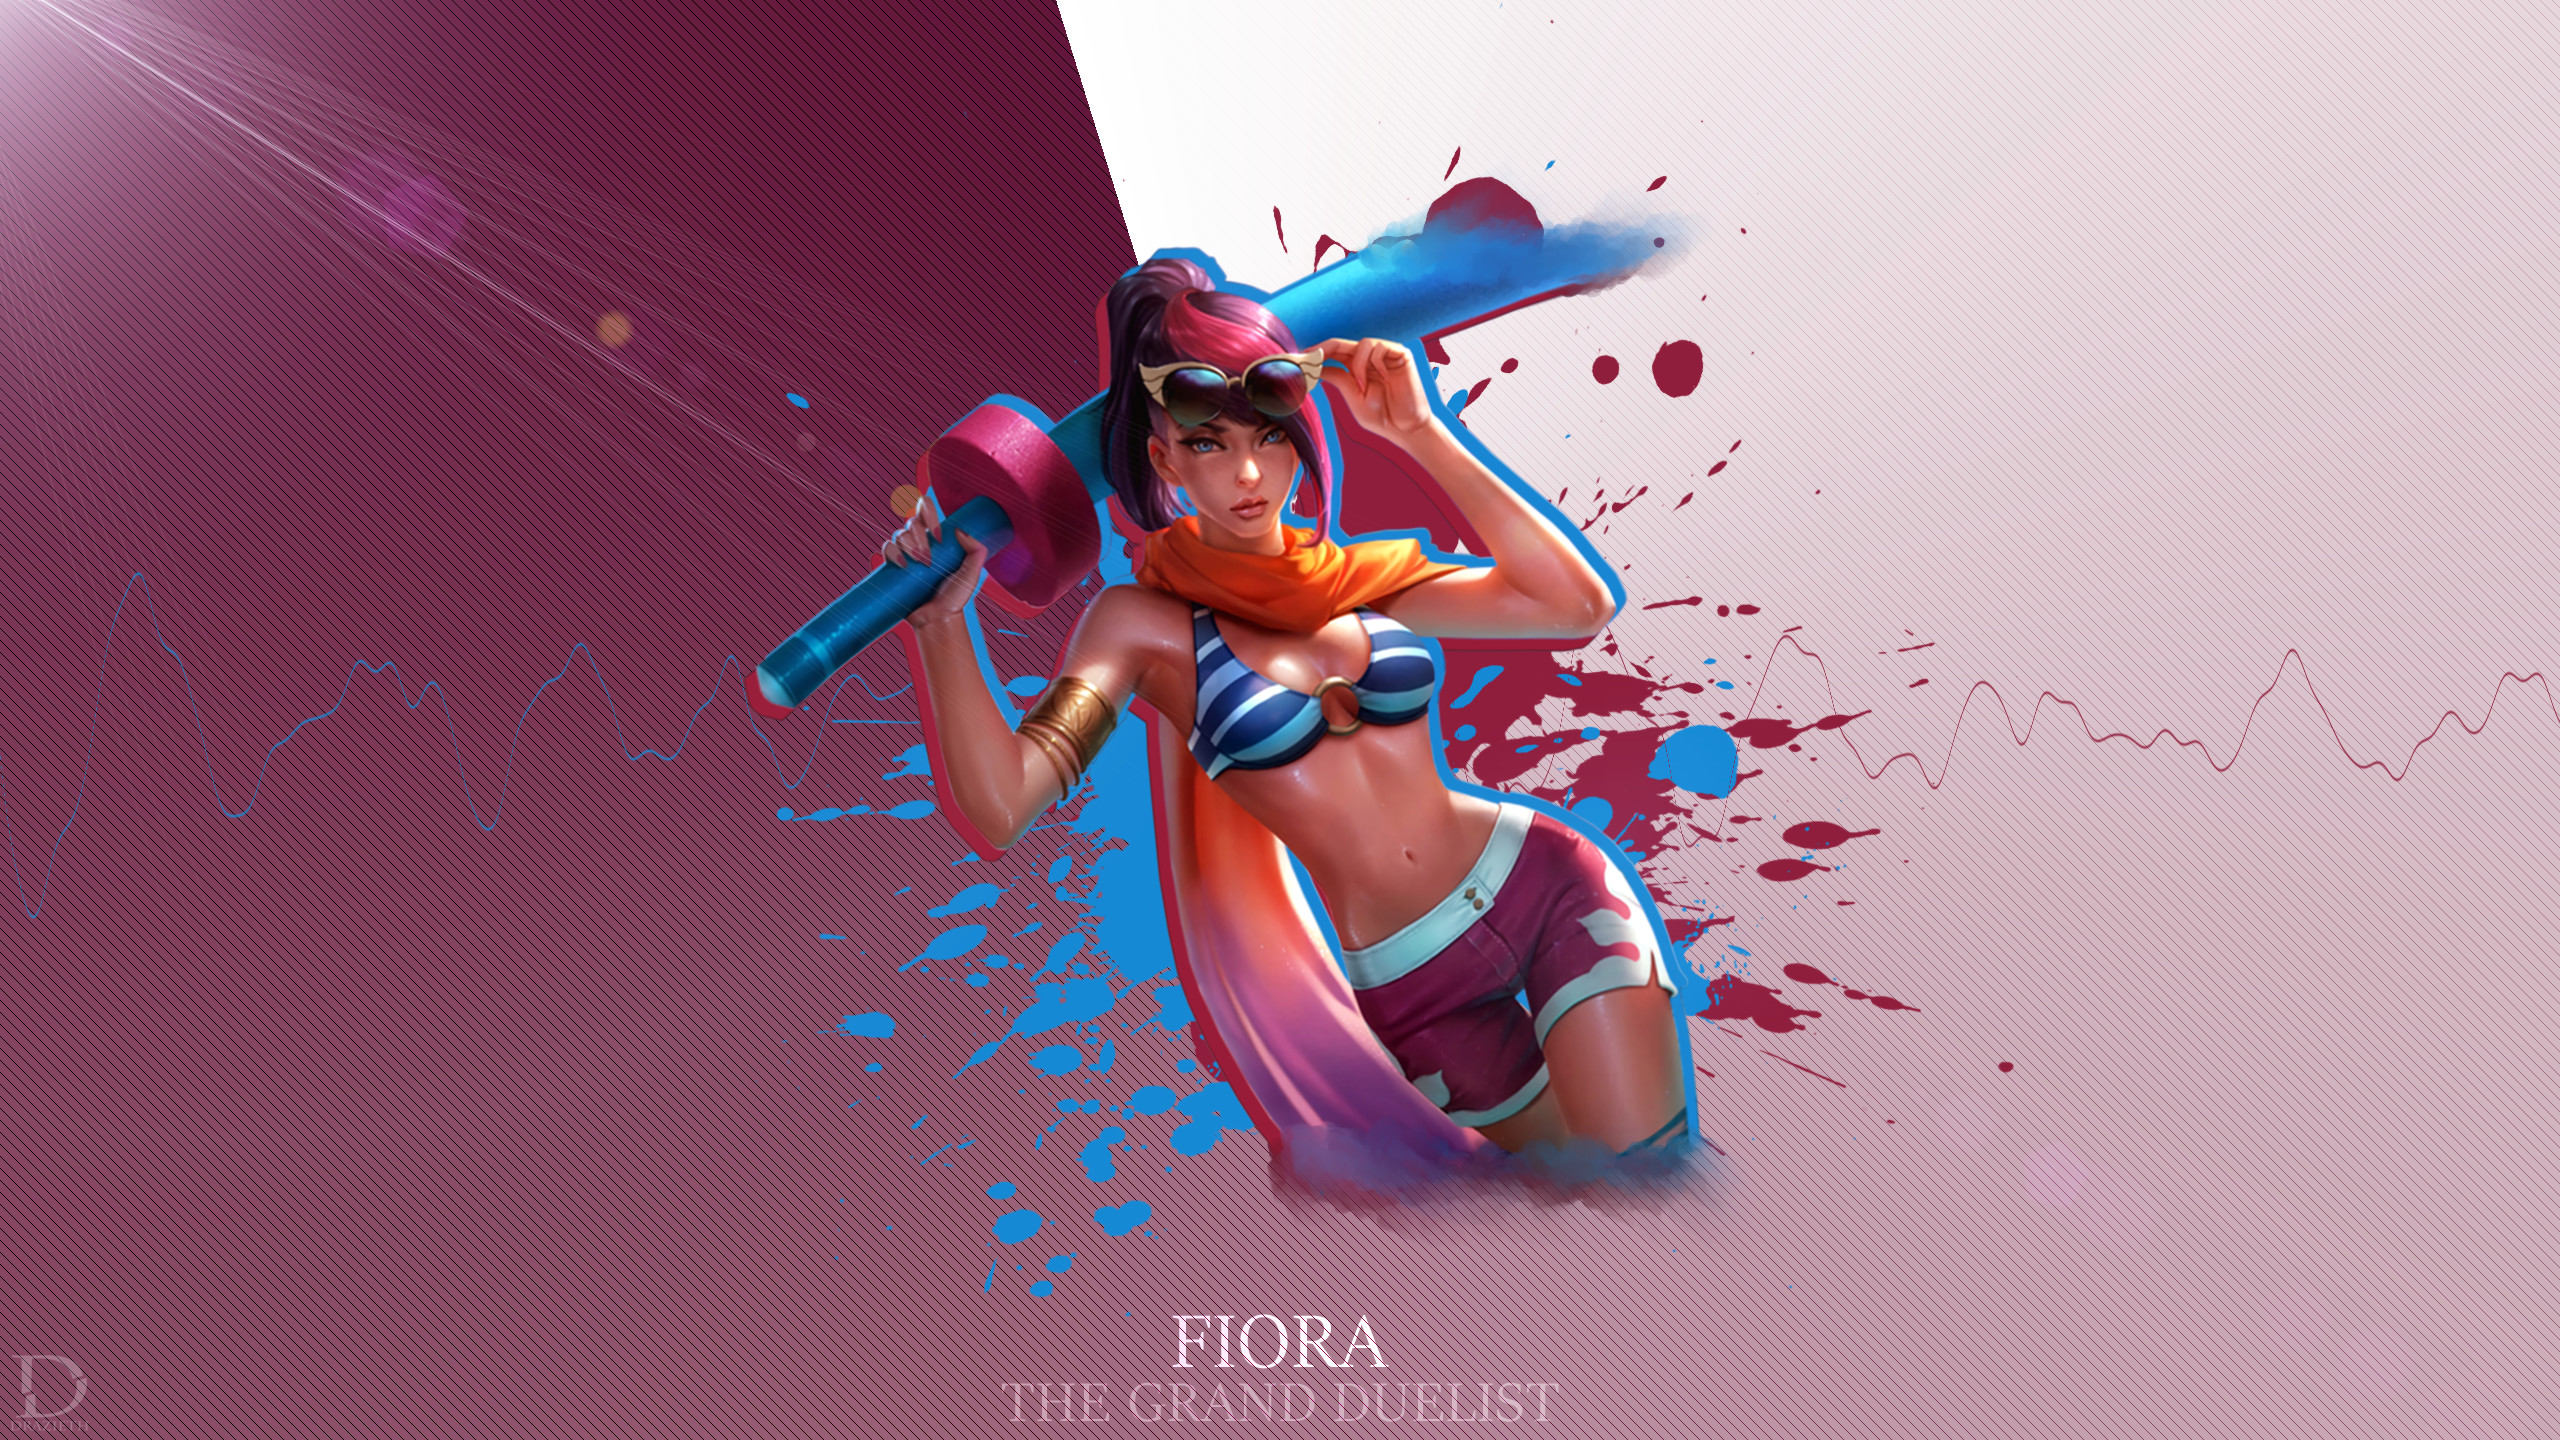 2560x1440 ... Pool Party Fiora - League of Legends Wallpaper by Drazieth